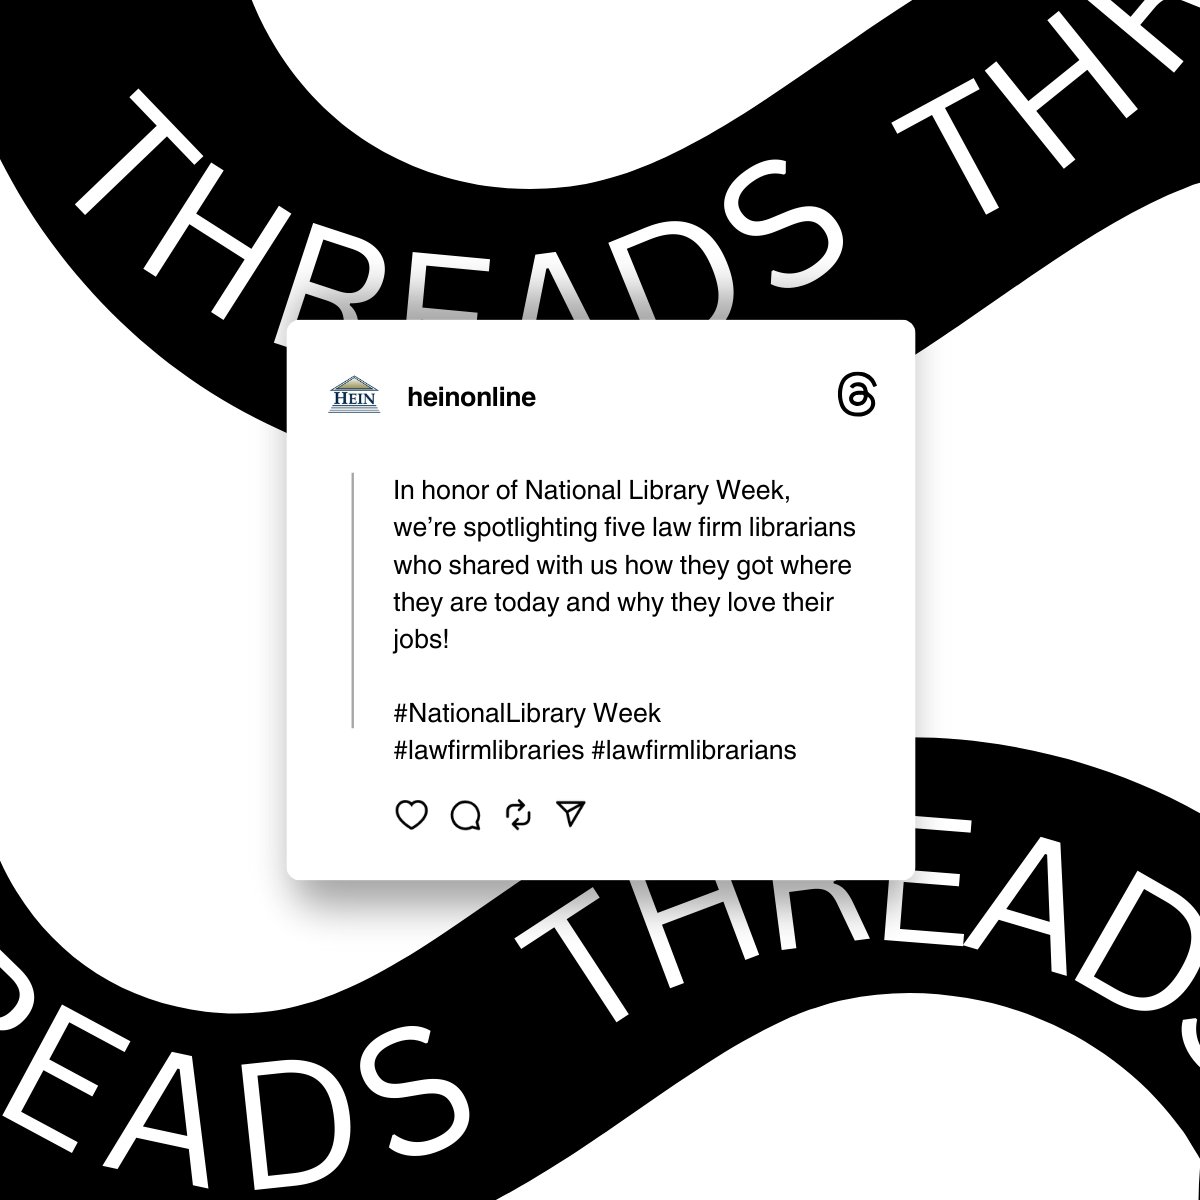 Did you know we are on Threads? Check us out! threads.net/@heinonline